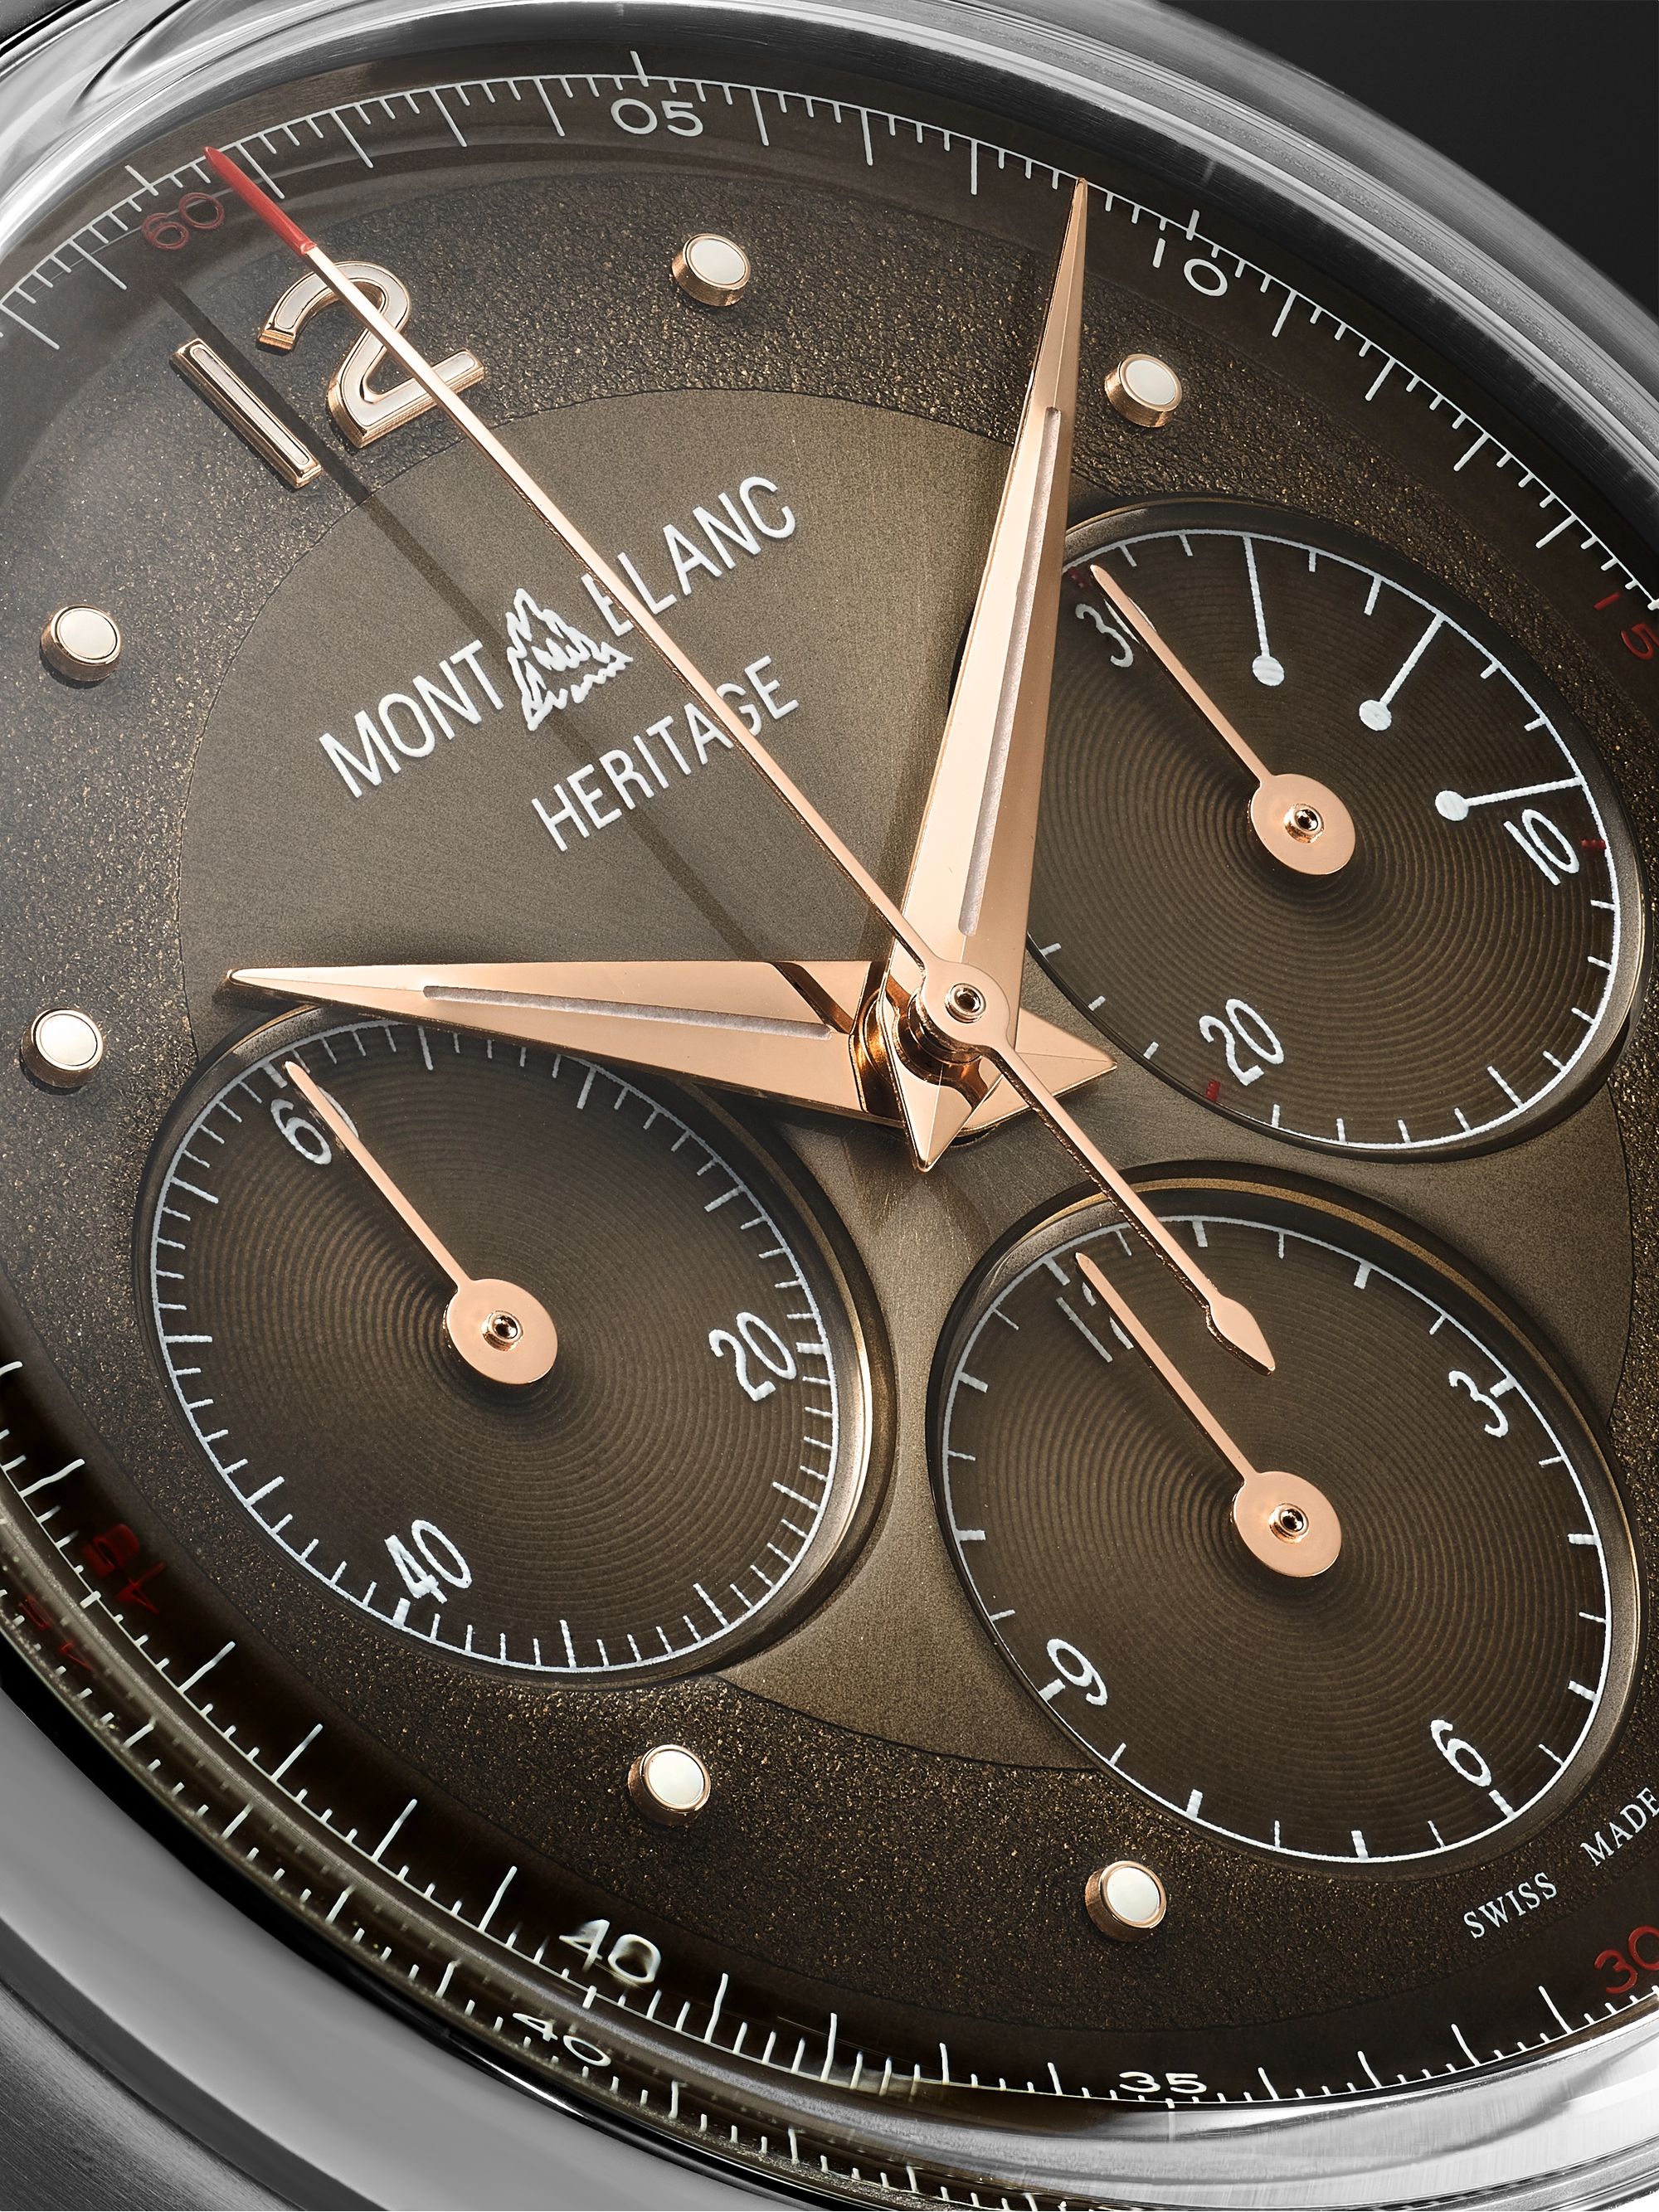 MONTBLANC Heritage Automatic Chronograph 41mm Stainless Steel and Alligator Watch, Ref. No. 128671